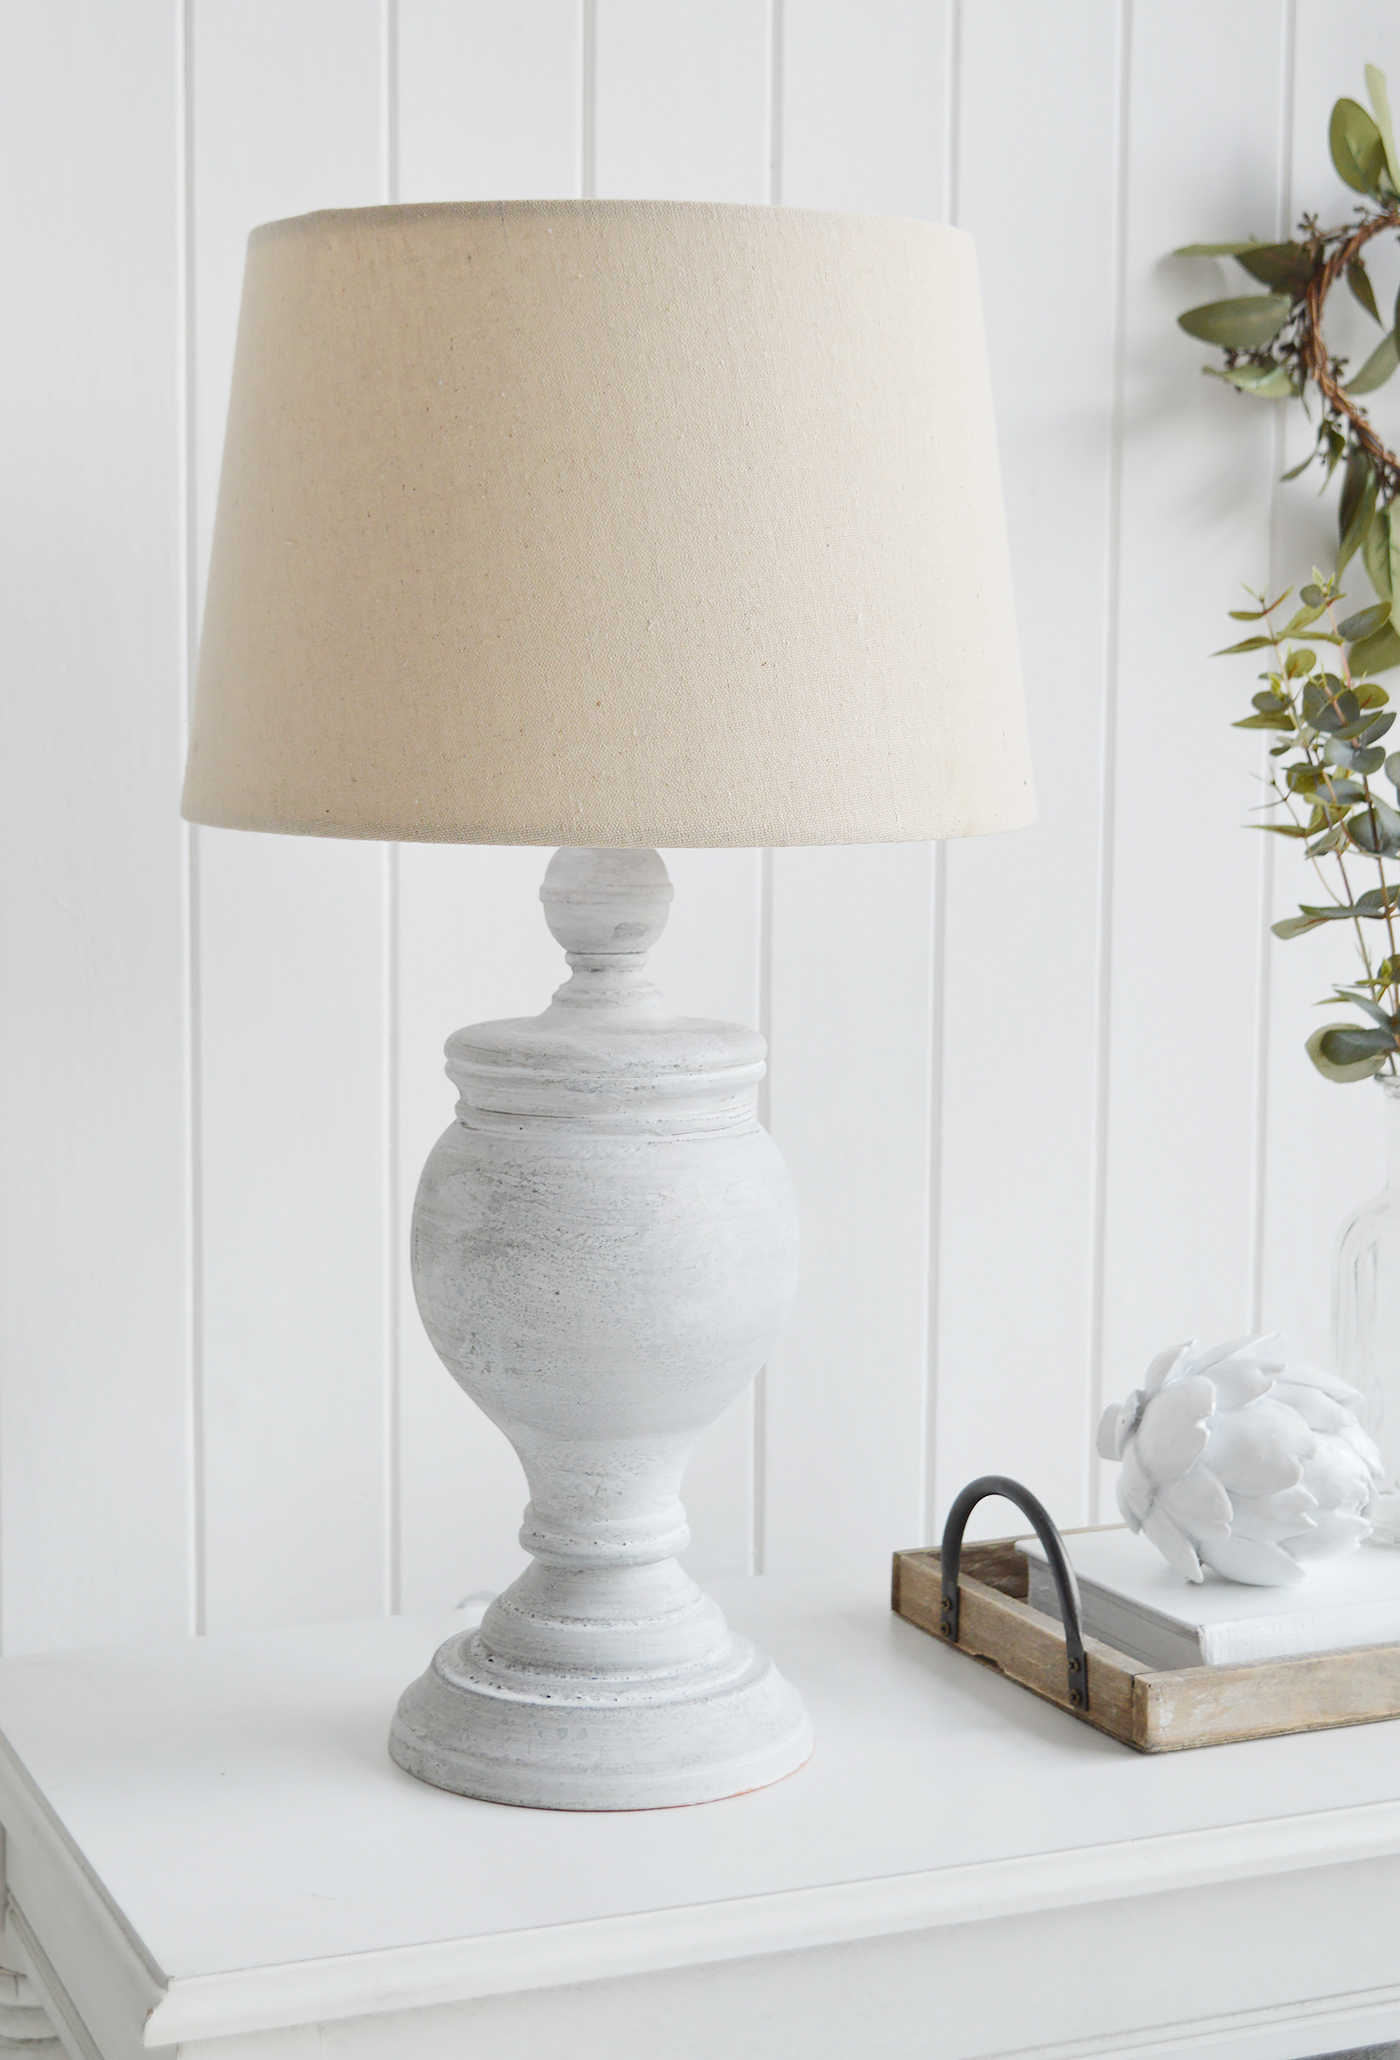 Lamps Rockport Table Lamp, Lighthouse Style Table Lamps